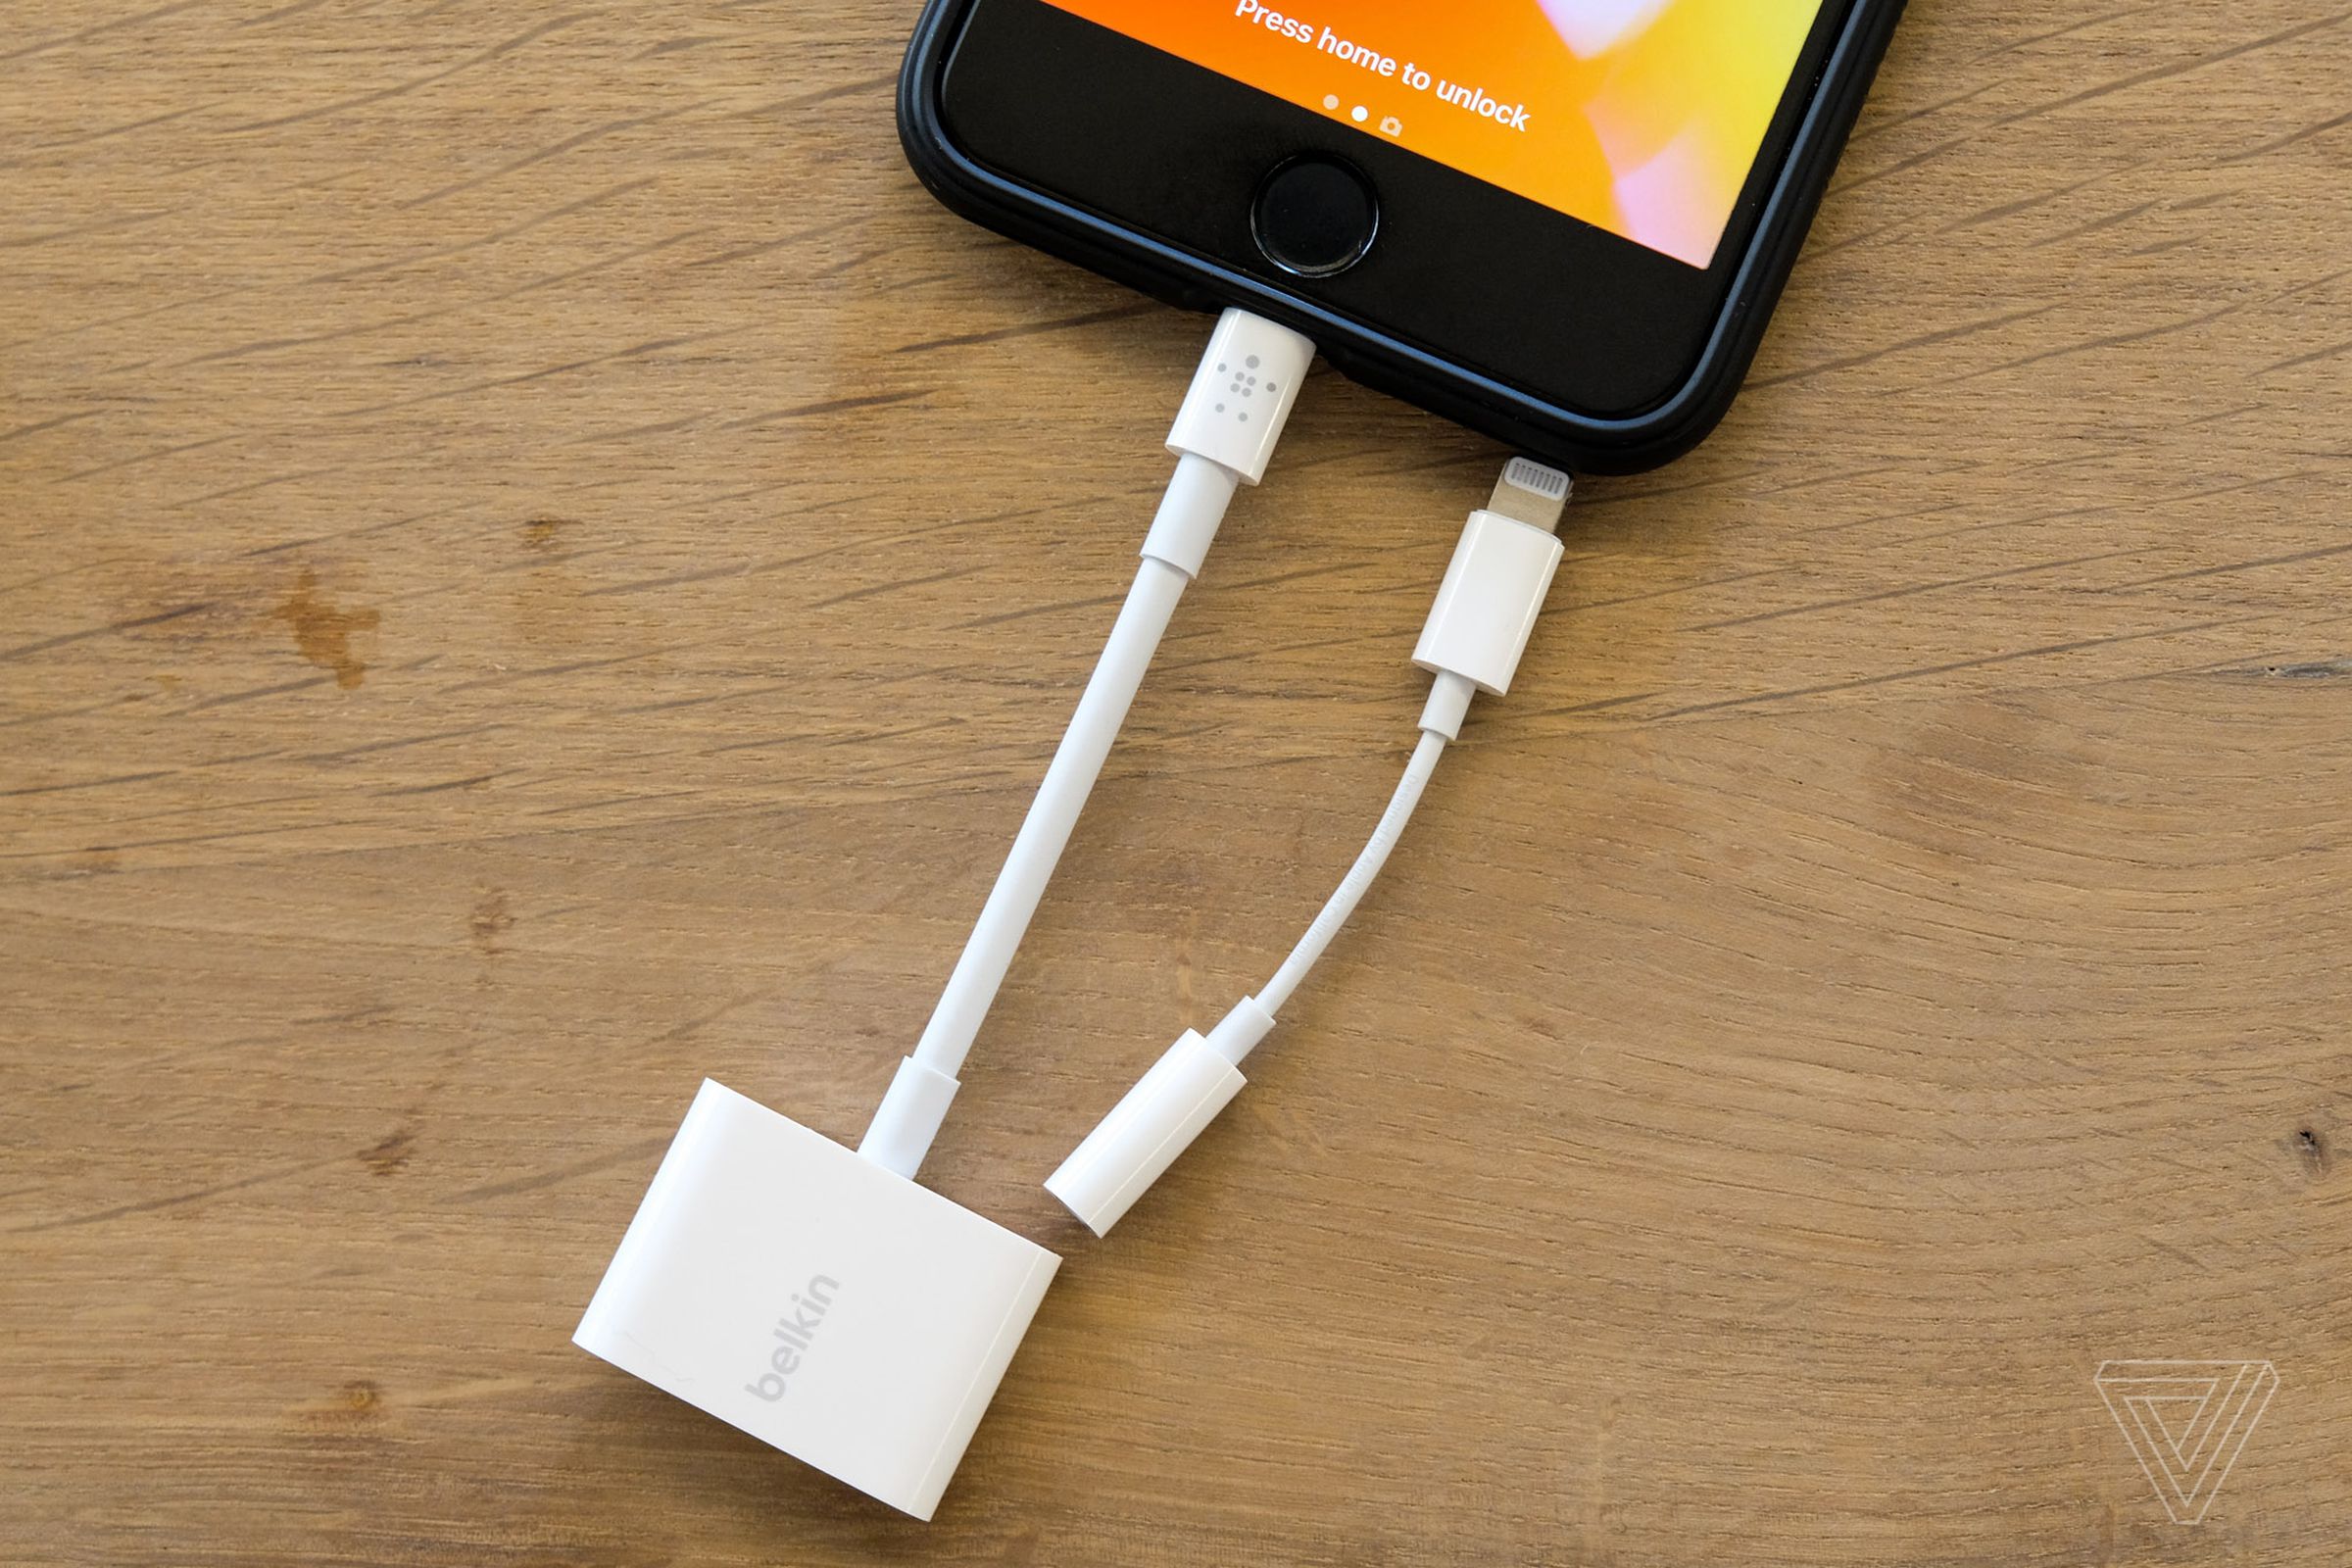 Be honest: how many Lightning to 3.5mm dongles have you purchased?